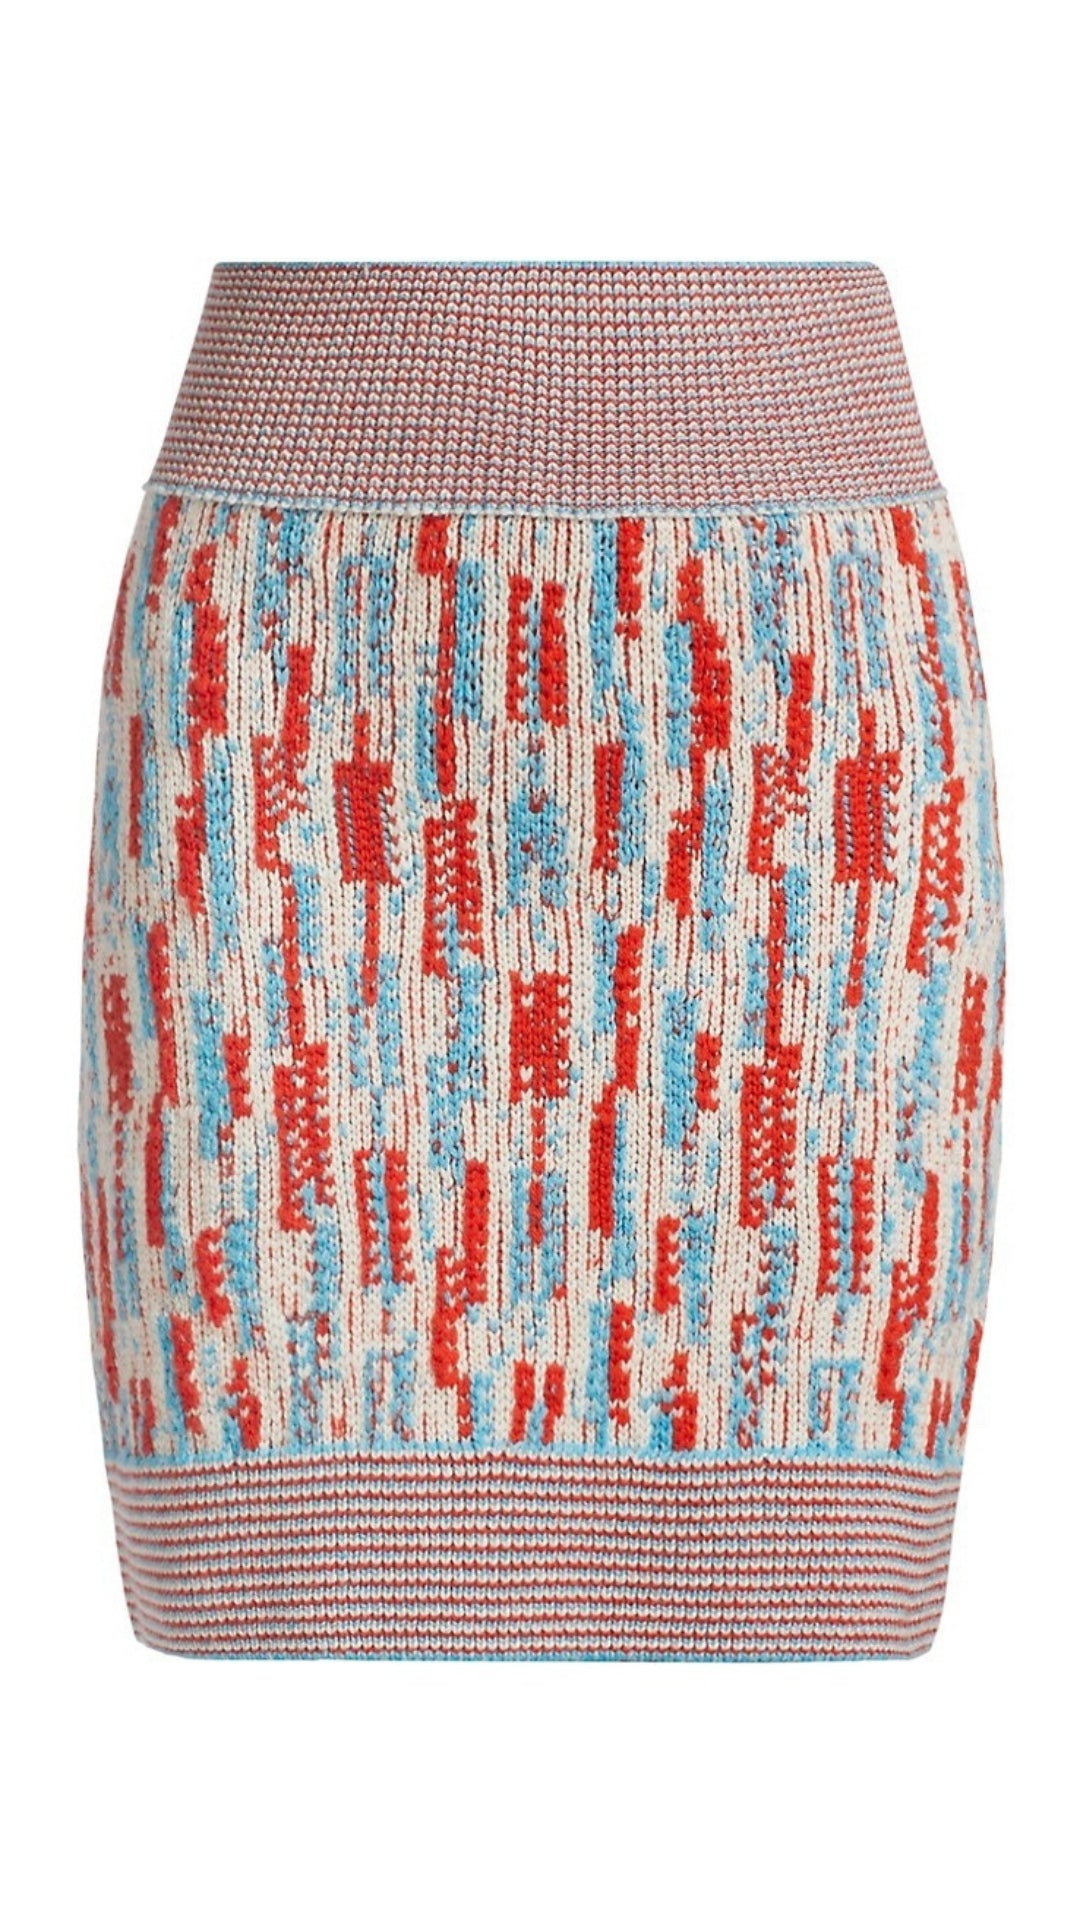 St. John Knit Mini Skirt in pattern of ecru, red and turquoise with contrasting waistband and hem. Pull up style. The hemline lands to just above the knee. Product photo shown from the front.